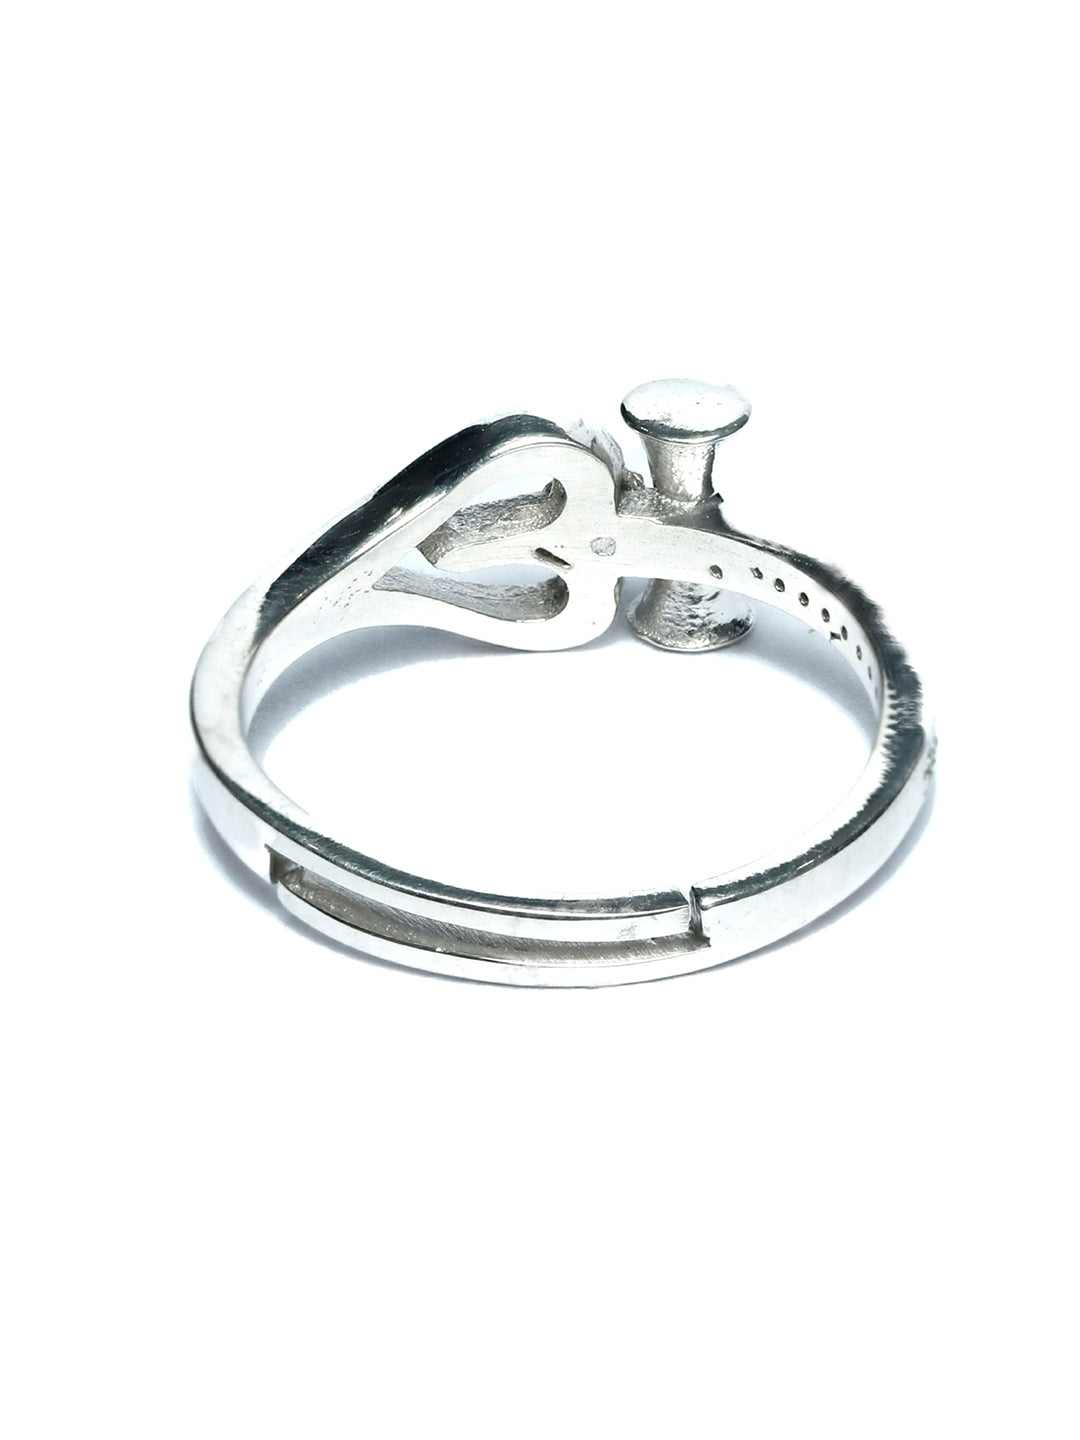 The Divine Trishul Sterling Silver Ring